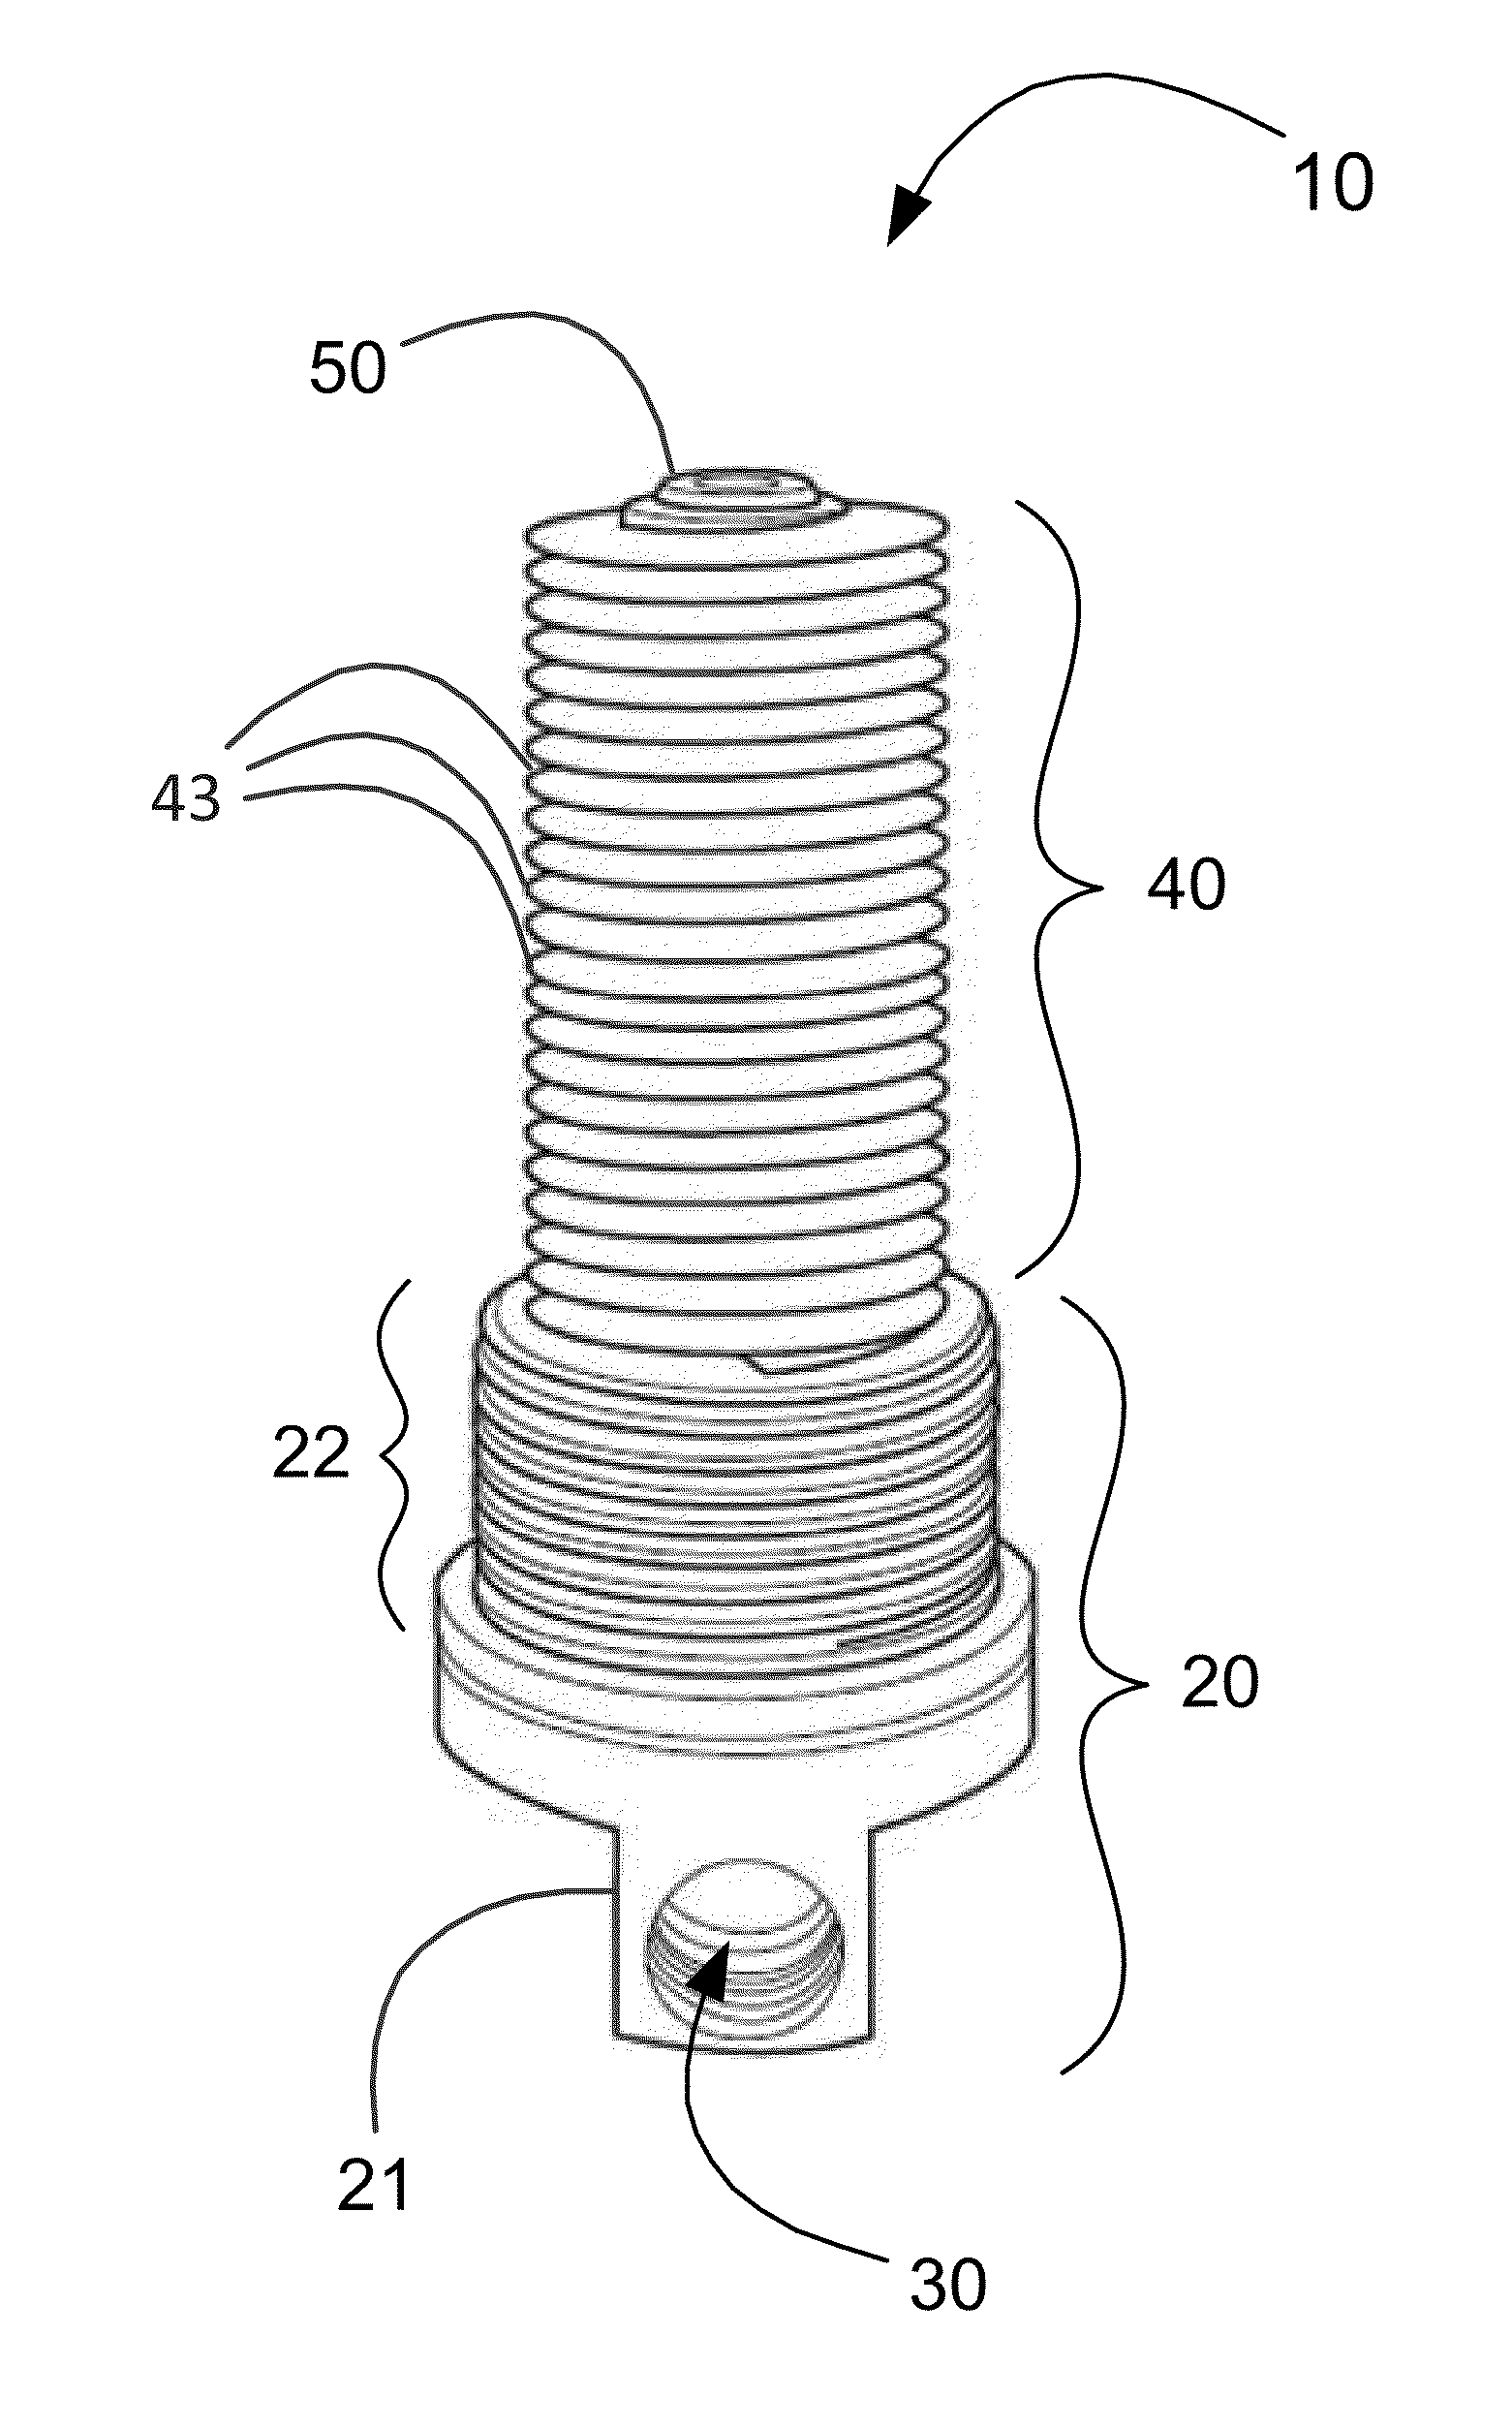 Heat-exchange apparatus for insertion into a storage tank, and mounting components therefor